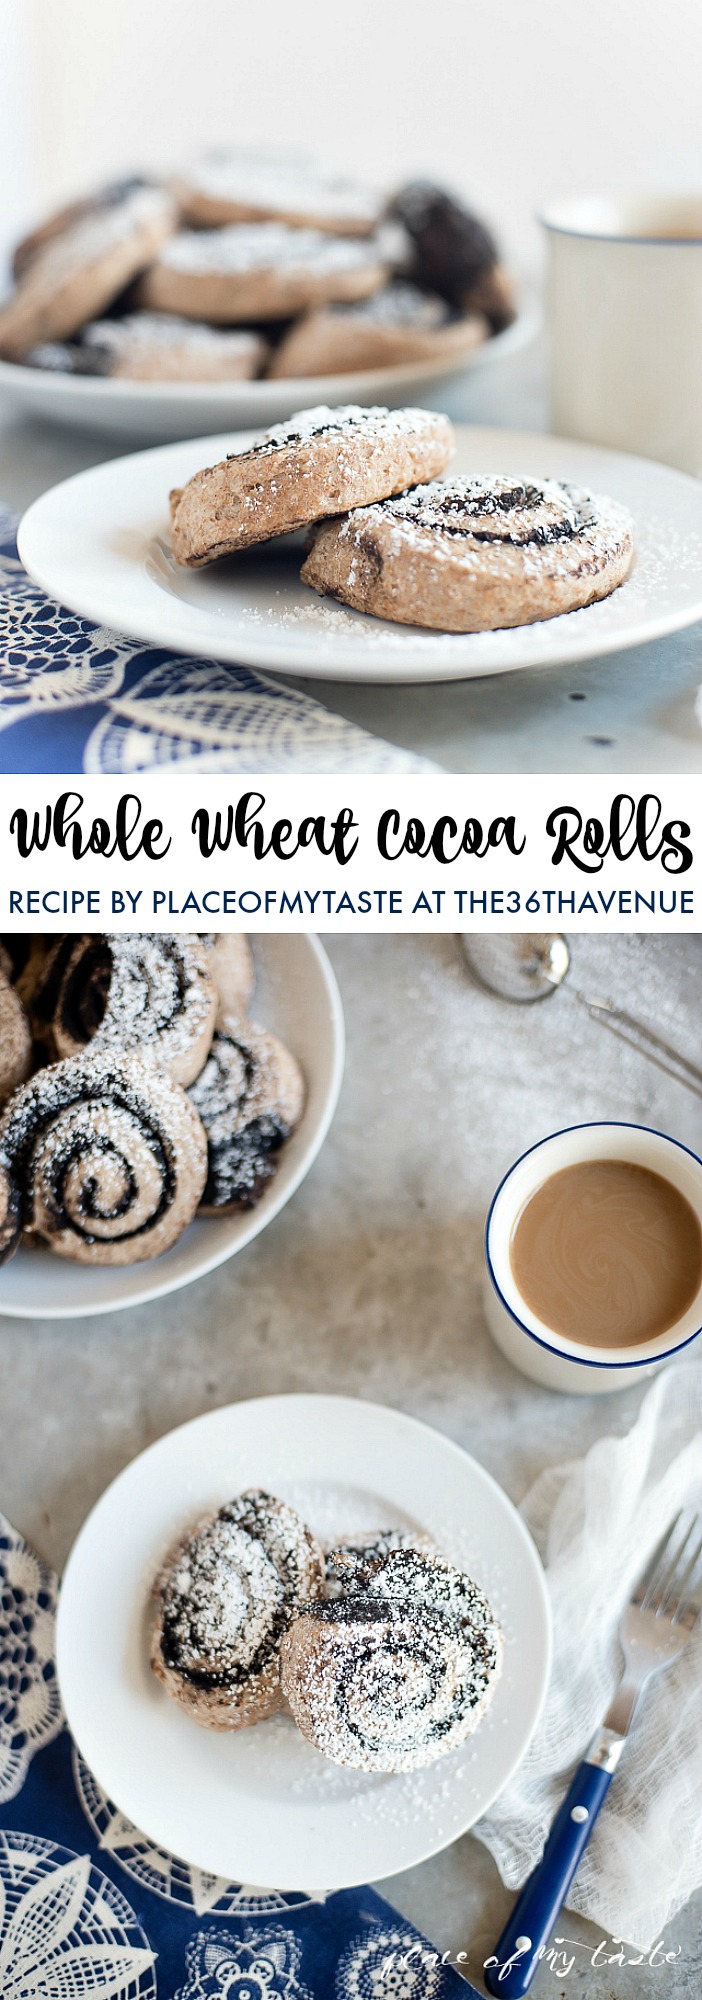 Whole Wheat Cocoa Rolls - This recipe tastes delicious! It's perfect for breakfast, dessert, snack or for anytime when you are craving a treat. You can make it with whole flour or regular kind! Super yummy!